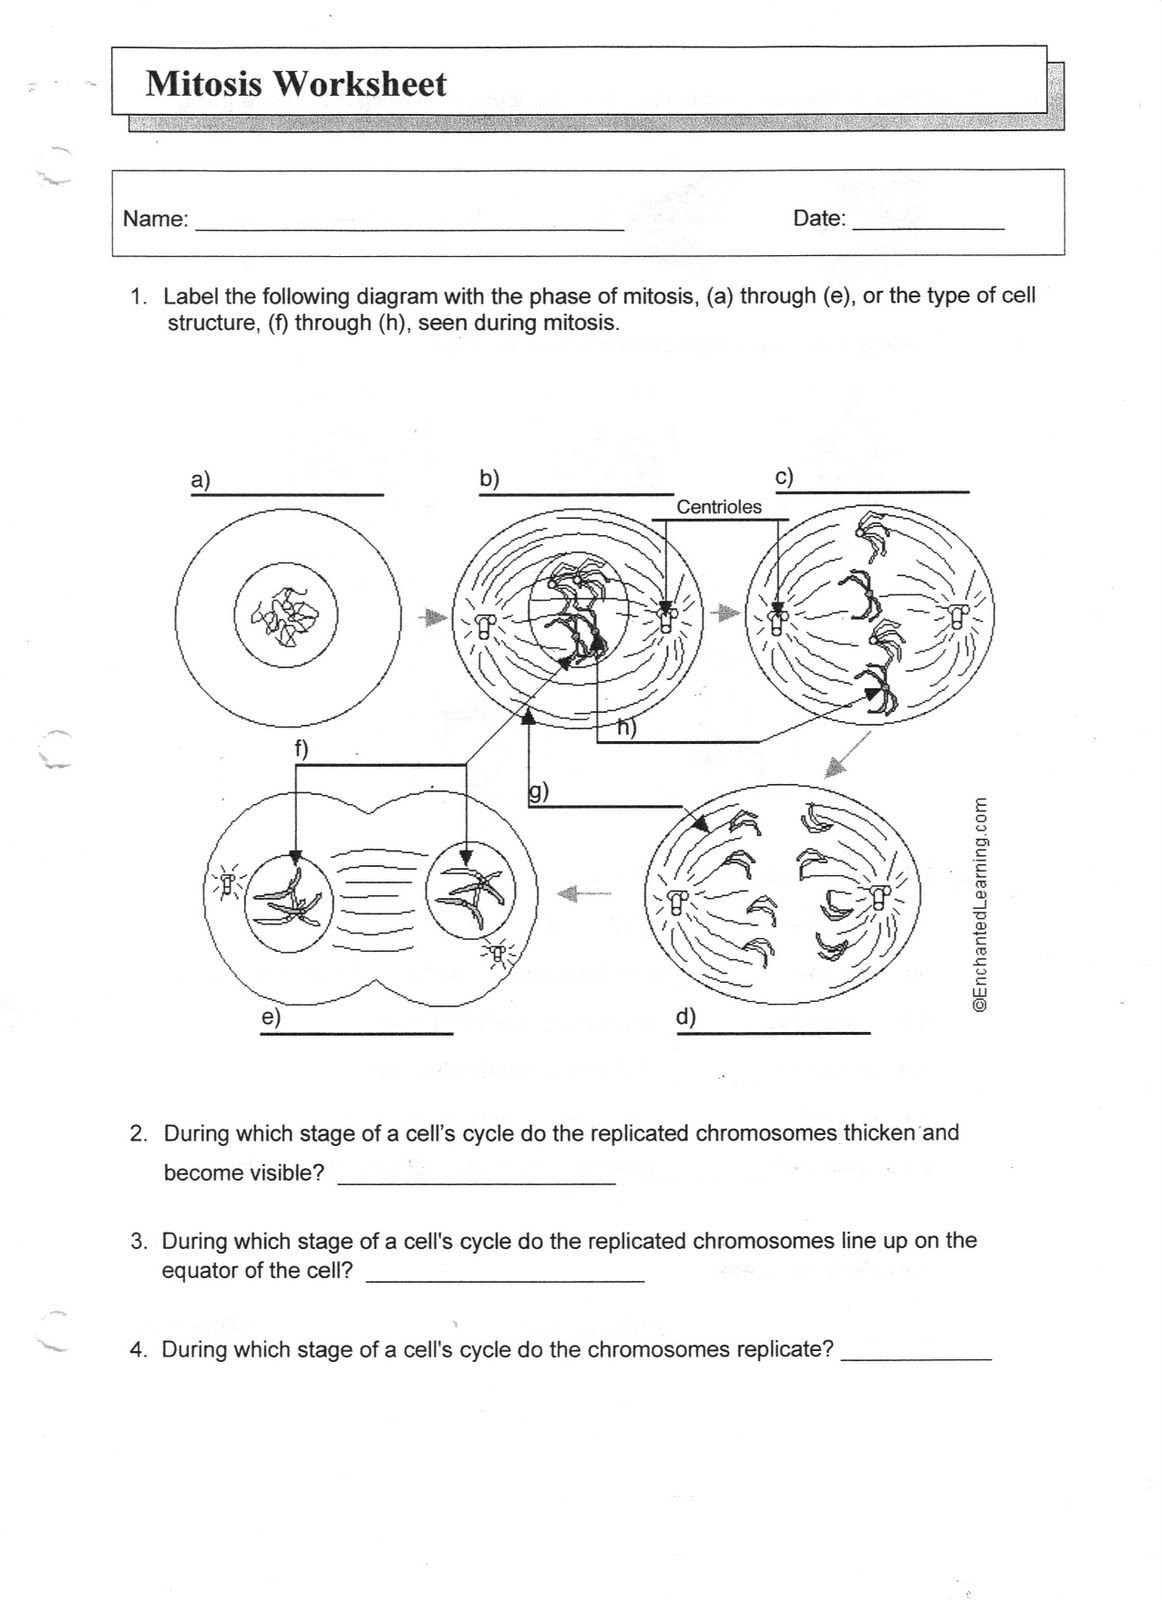 Cell Cycle and Mitosis Worksheet 20 Cell Cycle and Mitosis Worksheet